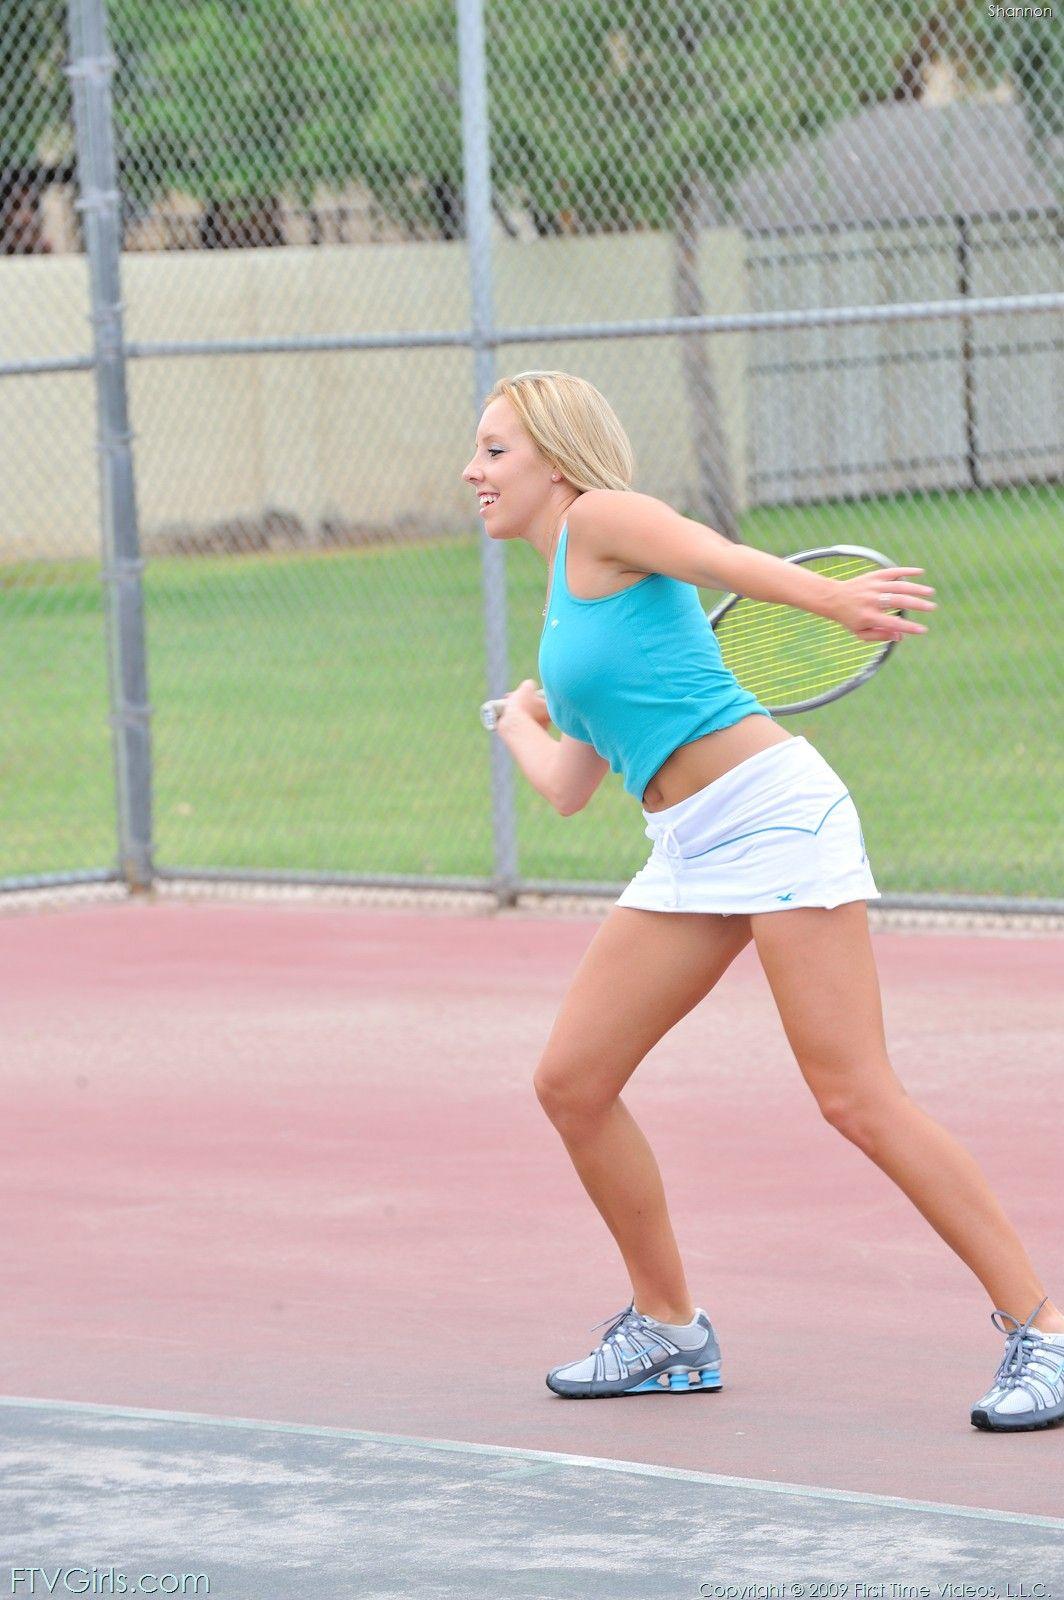 Pictures of Shannon playing an incredible game of tennis #59959539